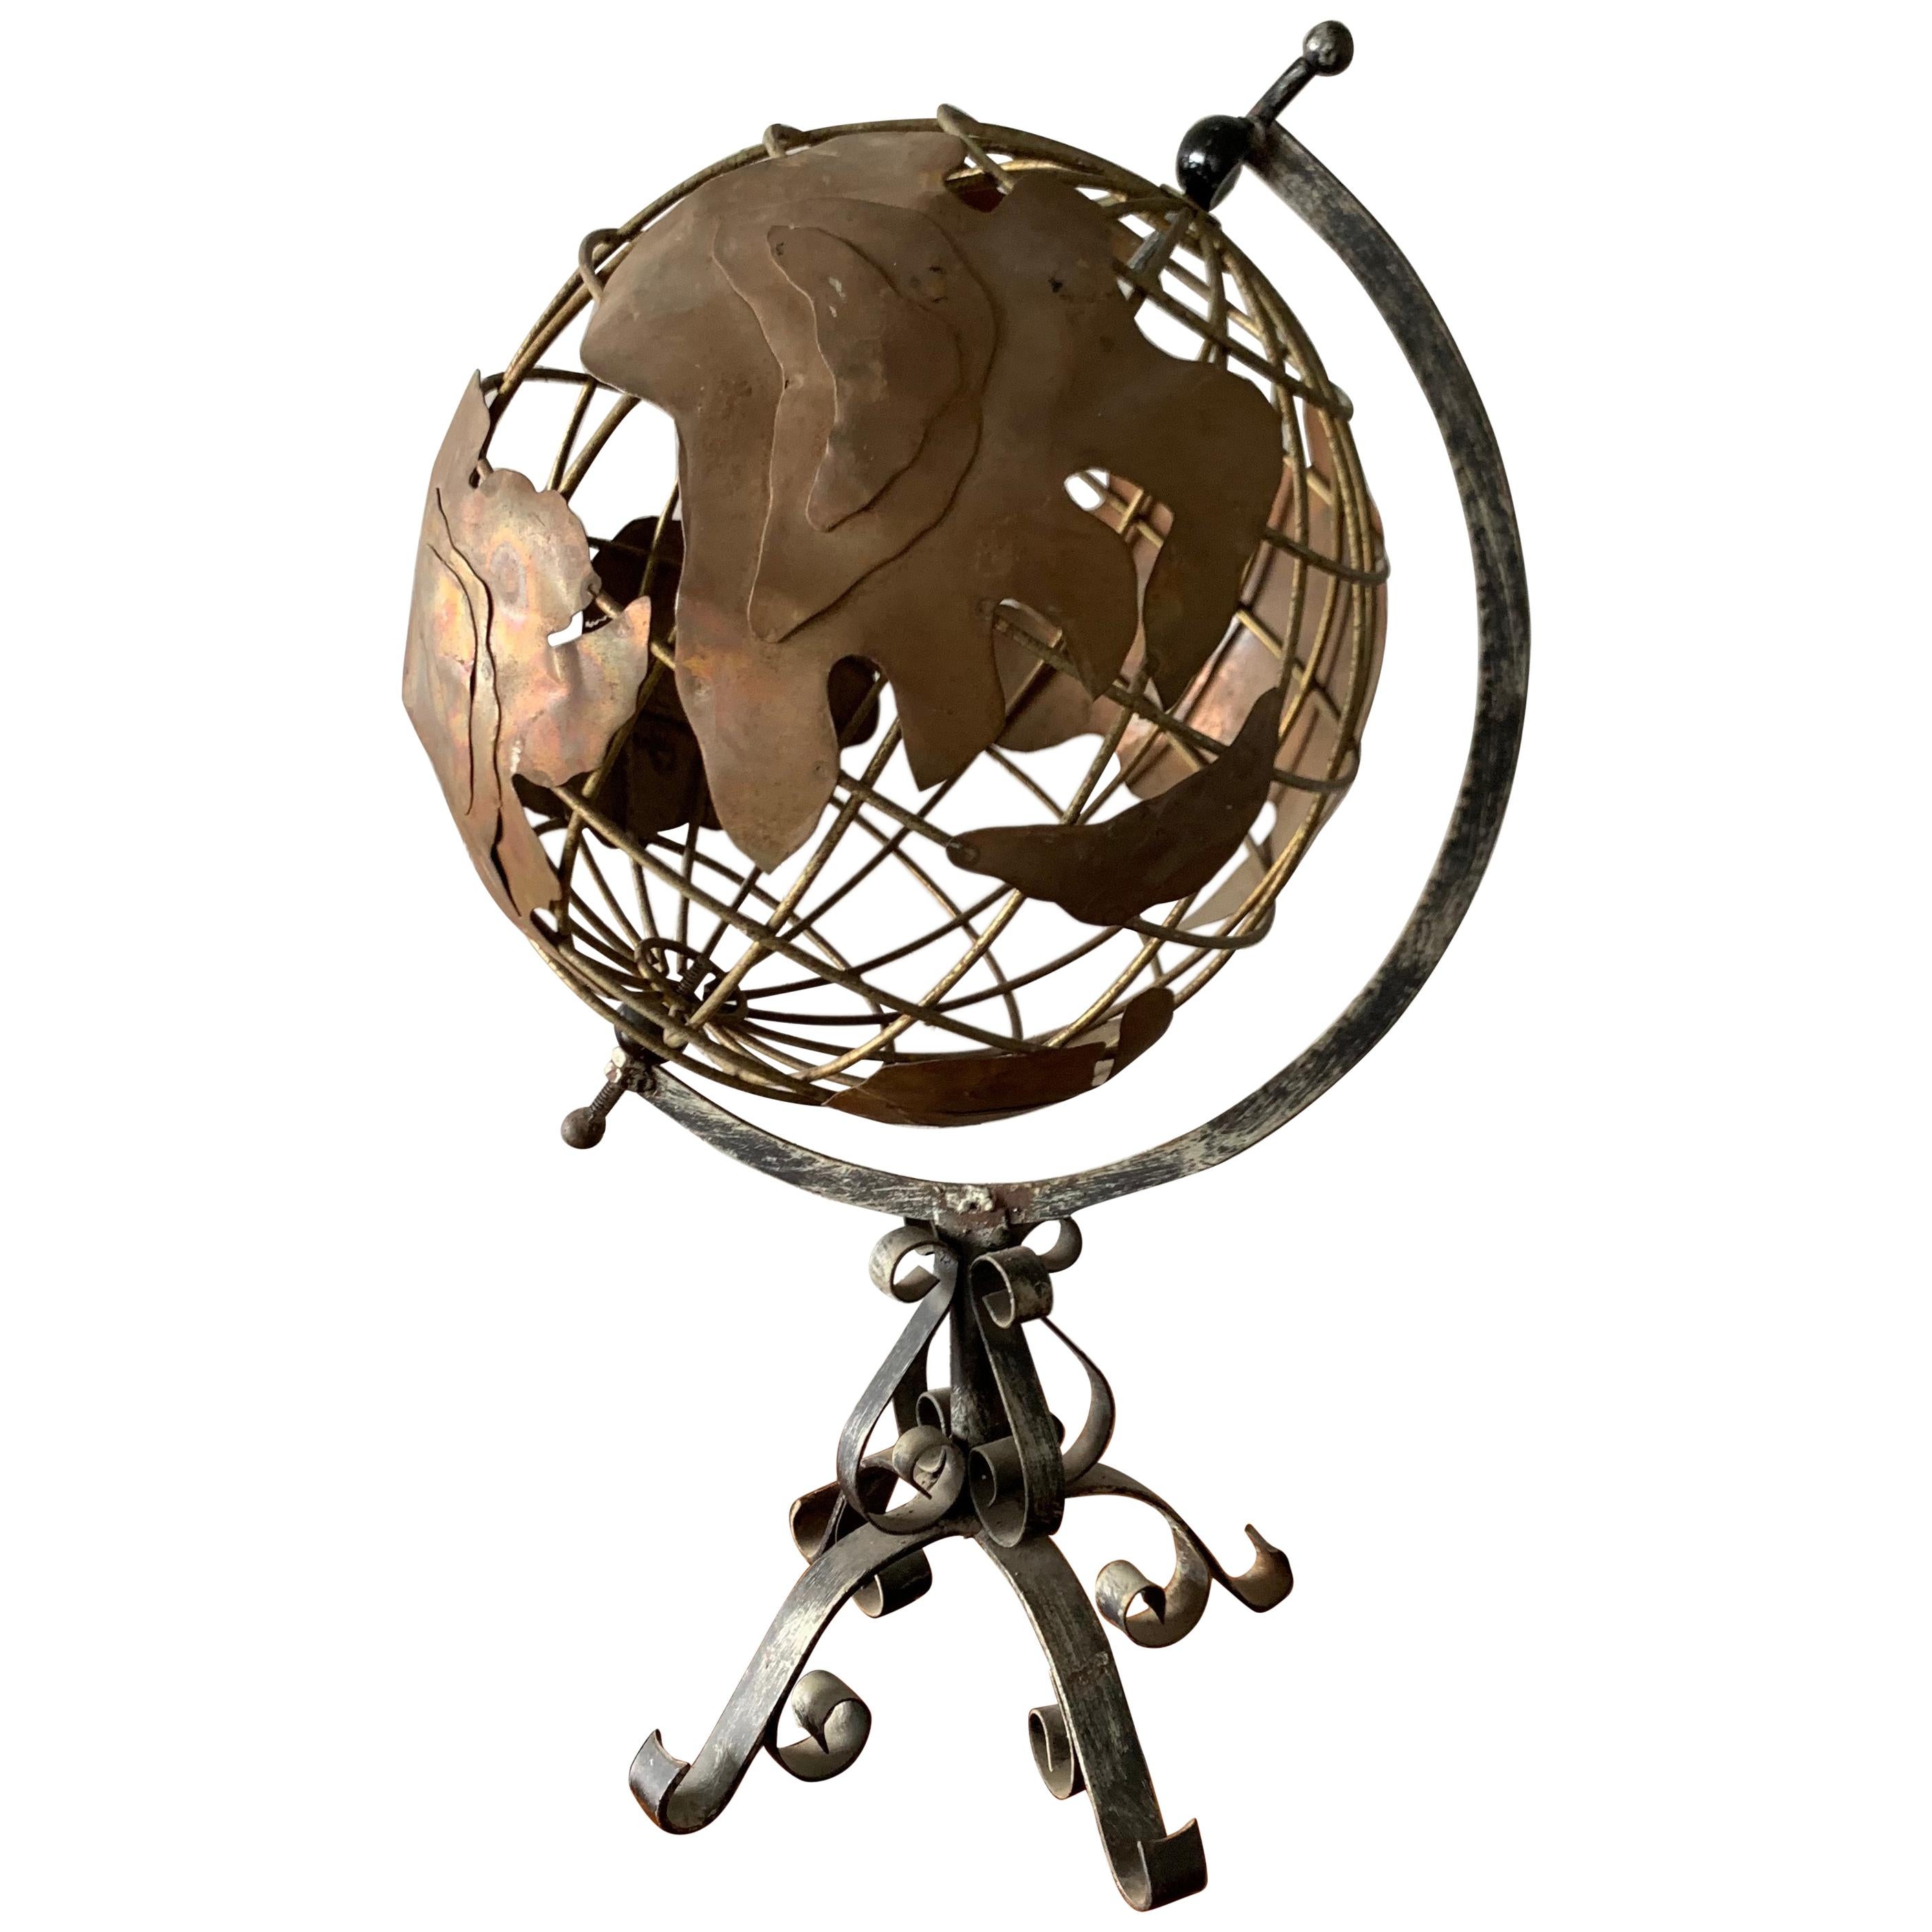 Vintage American Brass and Iron Table Globe